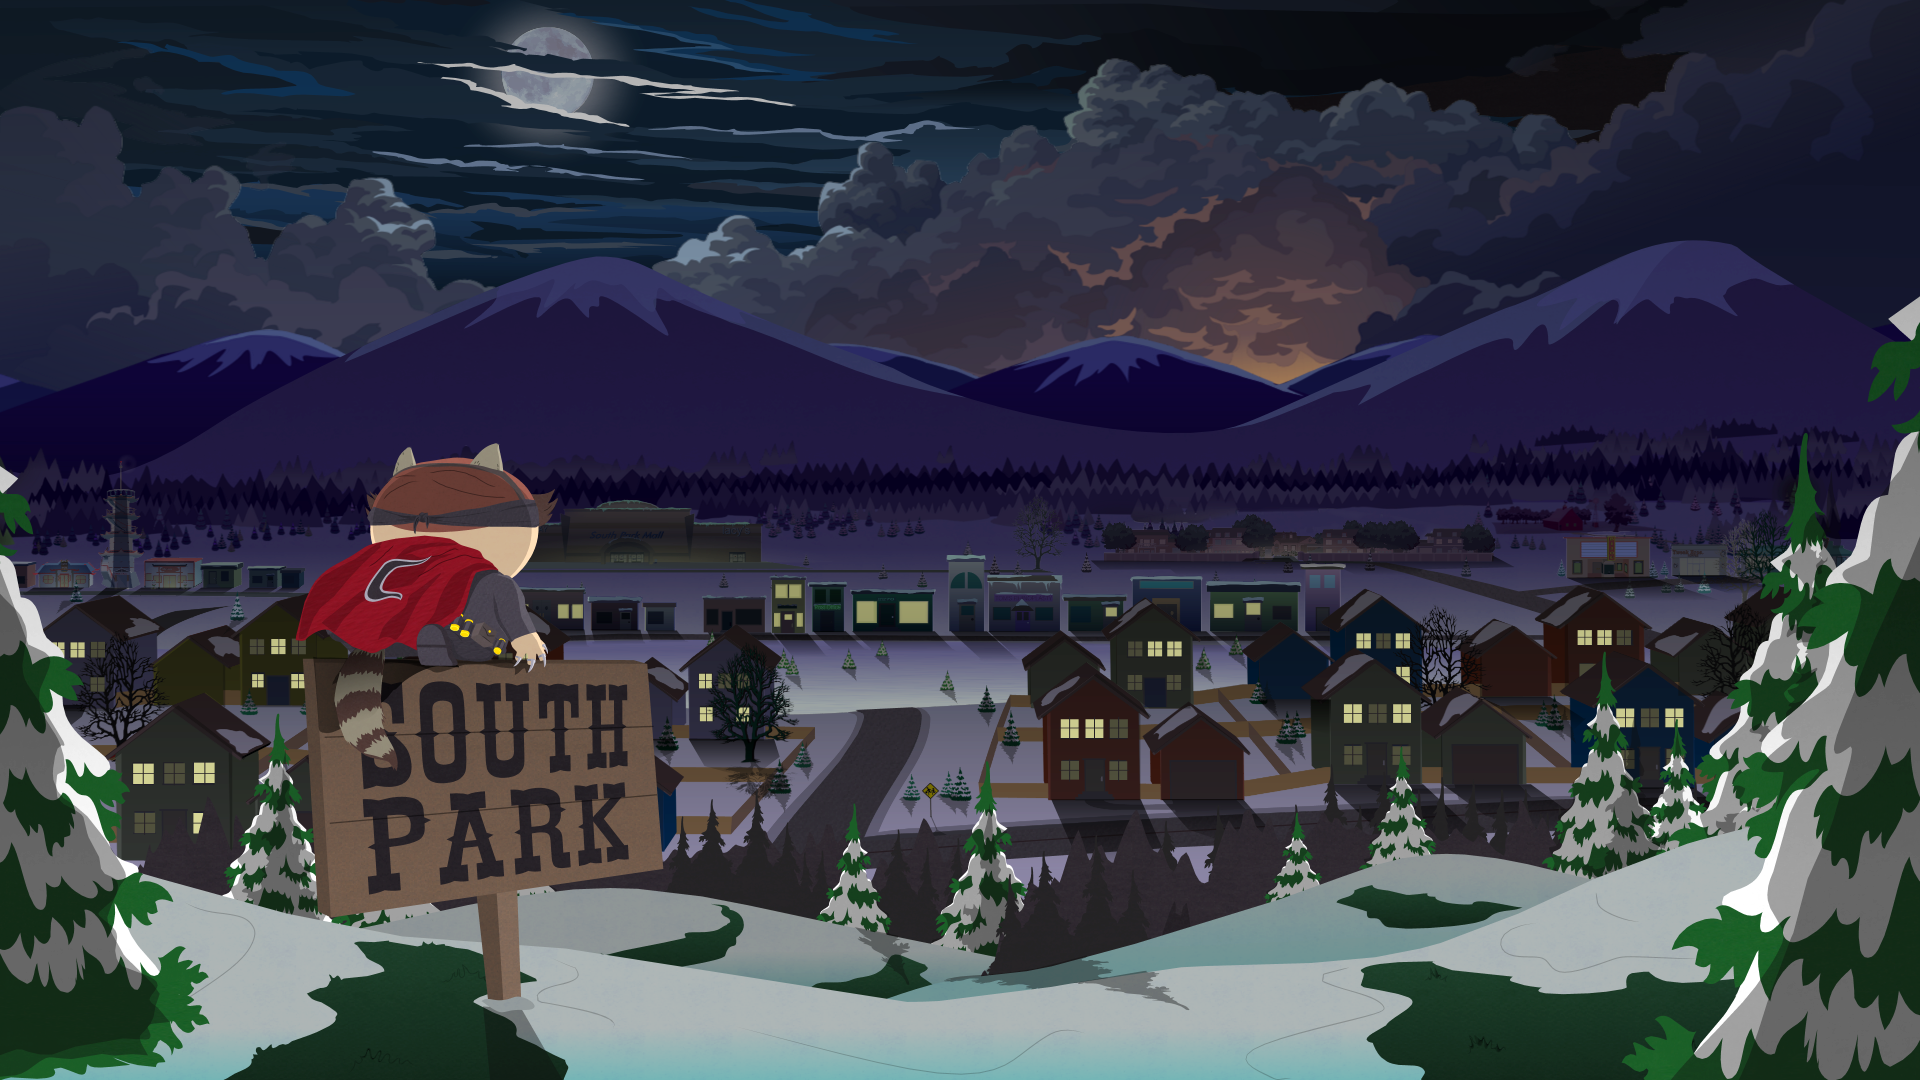 the coon south park